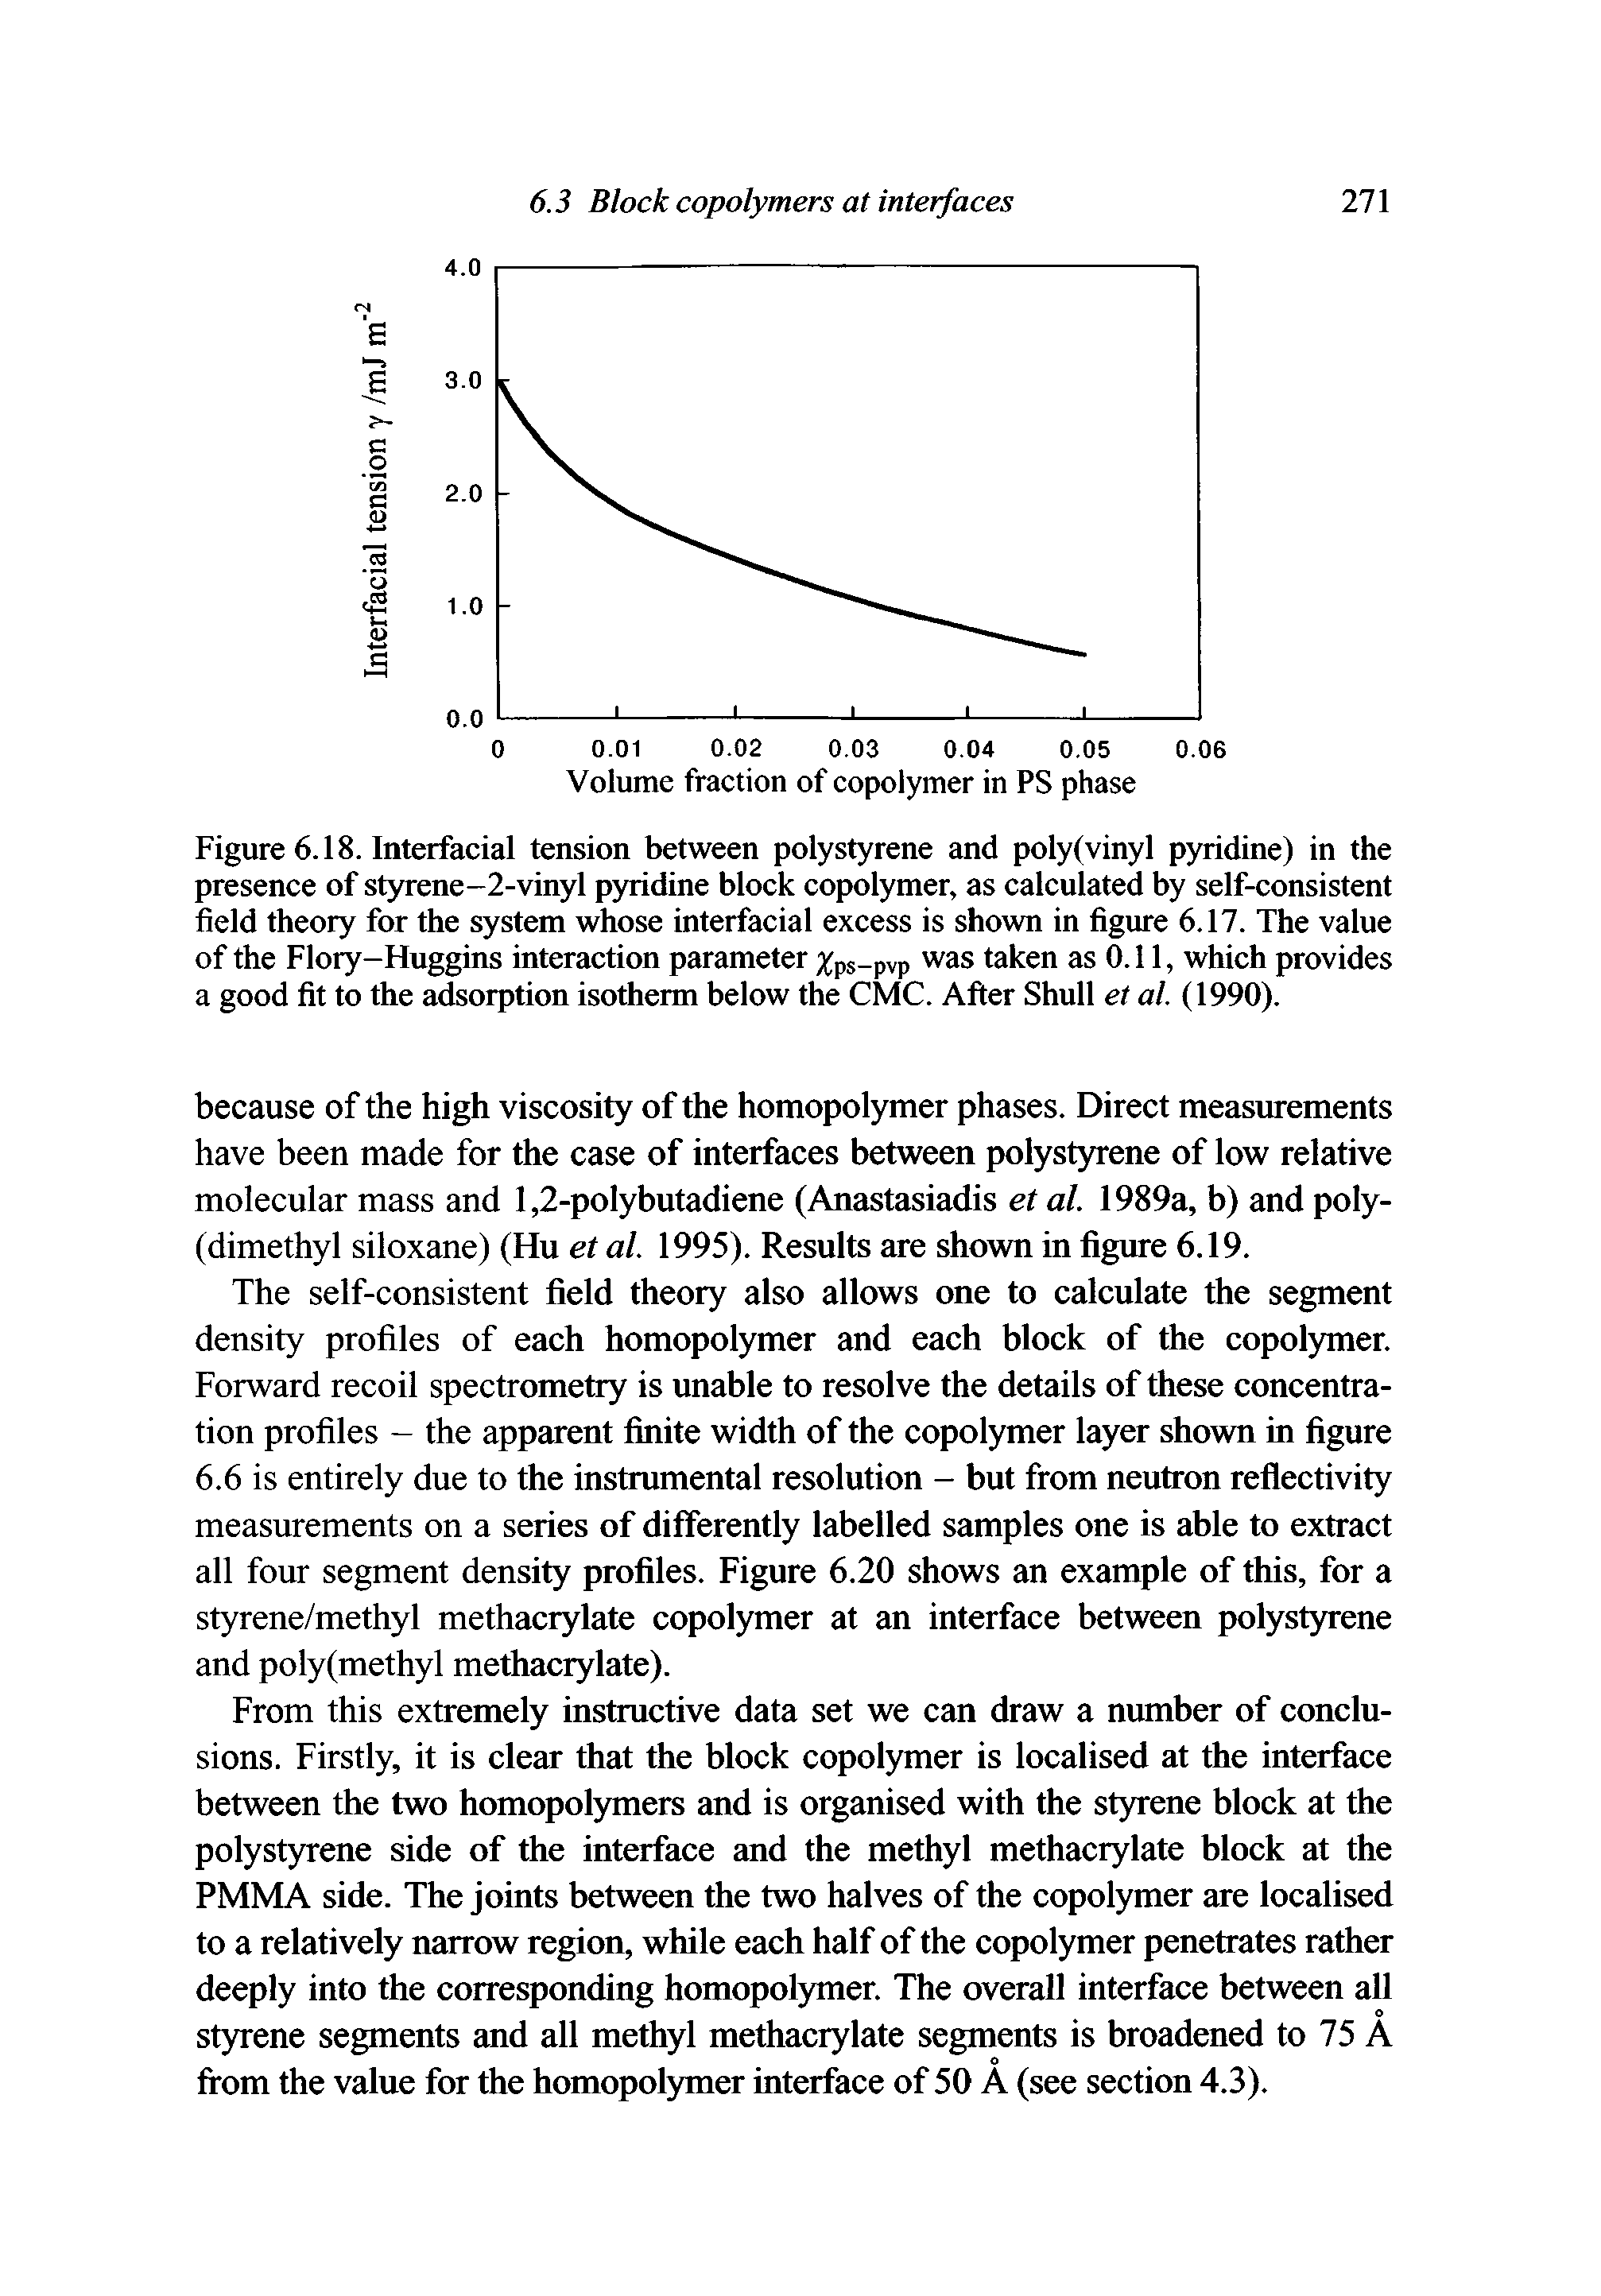 Figure 6.18. Interfacial tension between polystyrene and poly(vinyl pyridine) in the presence of styrene-2-vinyl pyridine block copolymer, as calculated by self-consistent field theory for the system whose interfacial excess is shown in figure 6.17. The value of the Flory-Huggins interaction parameter Xps-pvp was taken as 0.11, which provides a good fit to the adsorption isotherm below the CMC. After Shull et al. (1990).